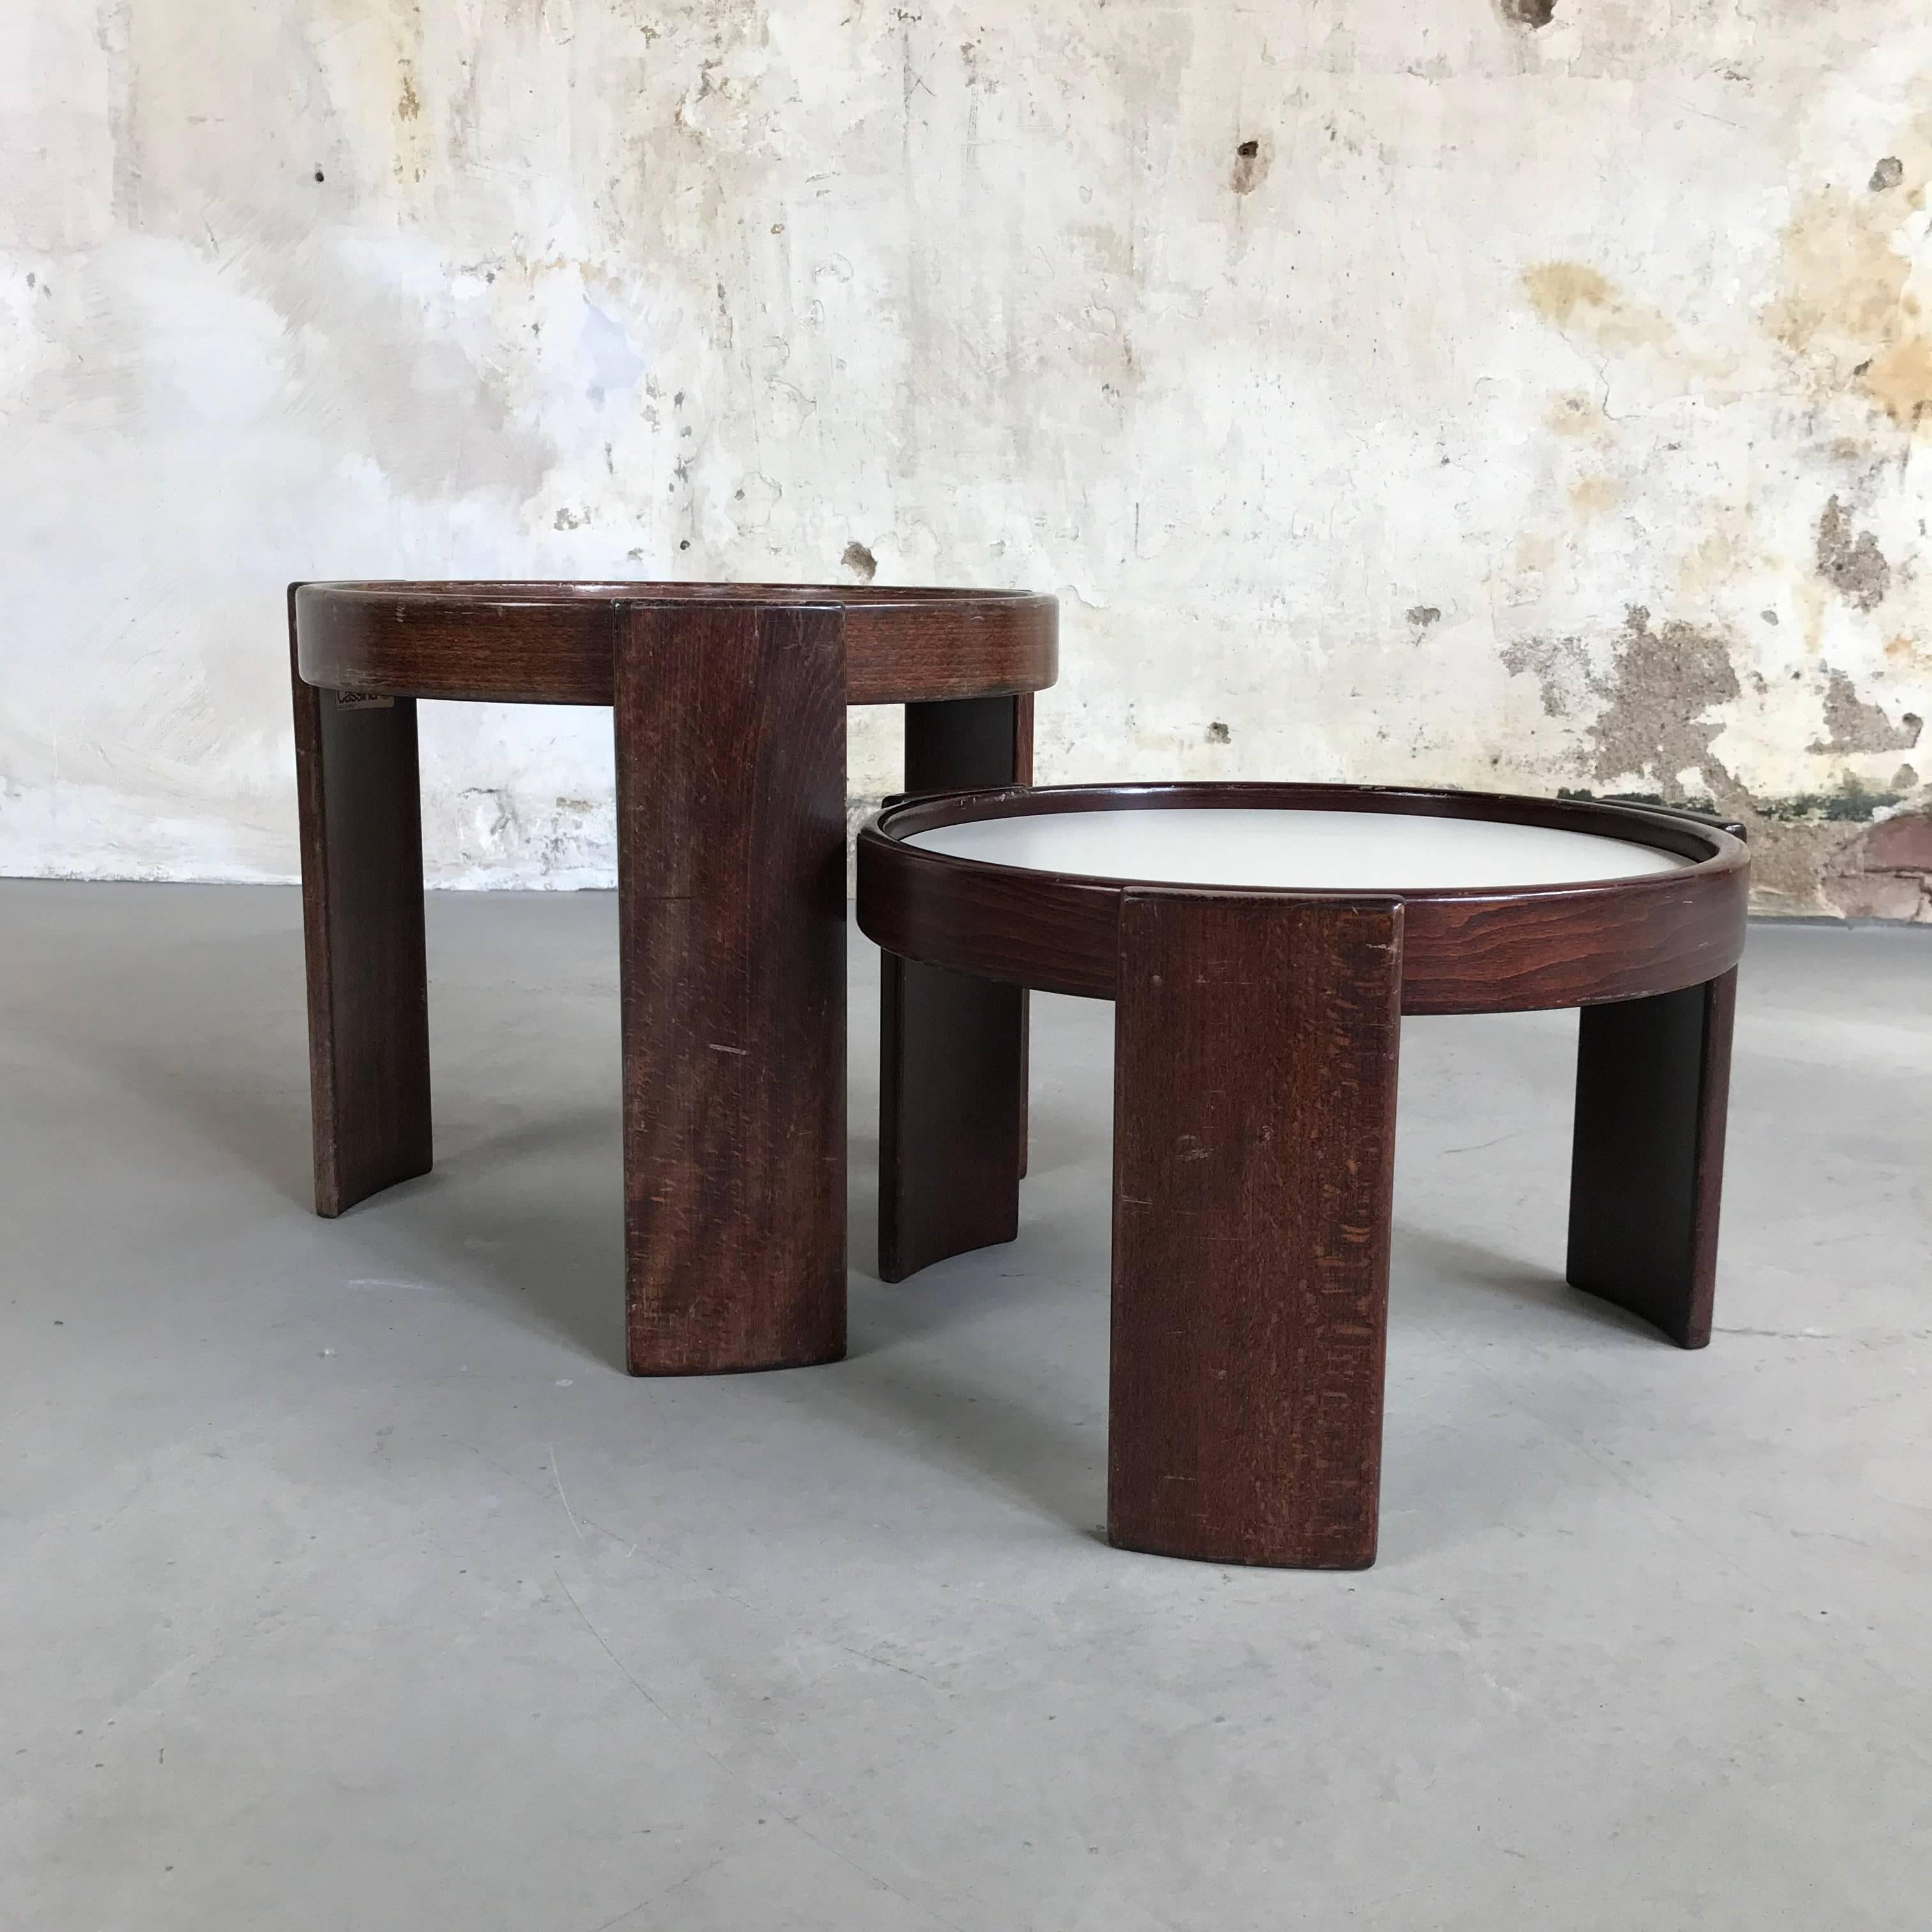 Laminated Midcentury Set of Reversible Stacking Tables by Gianfranco Frattini for Cassina